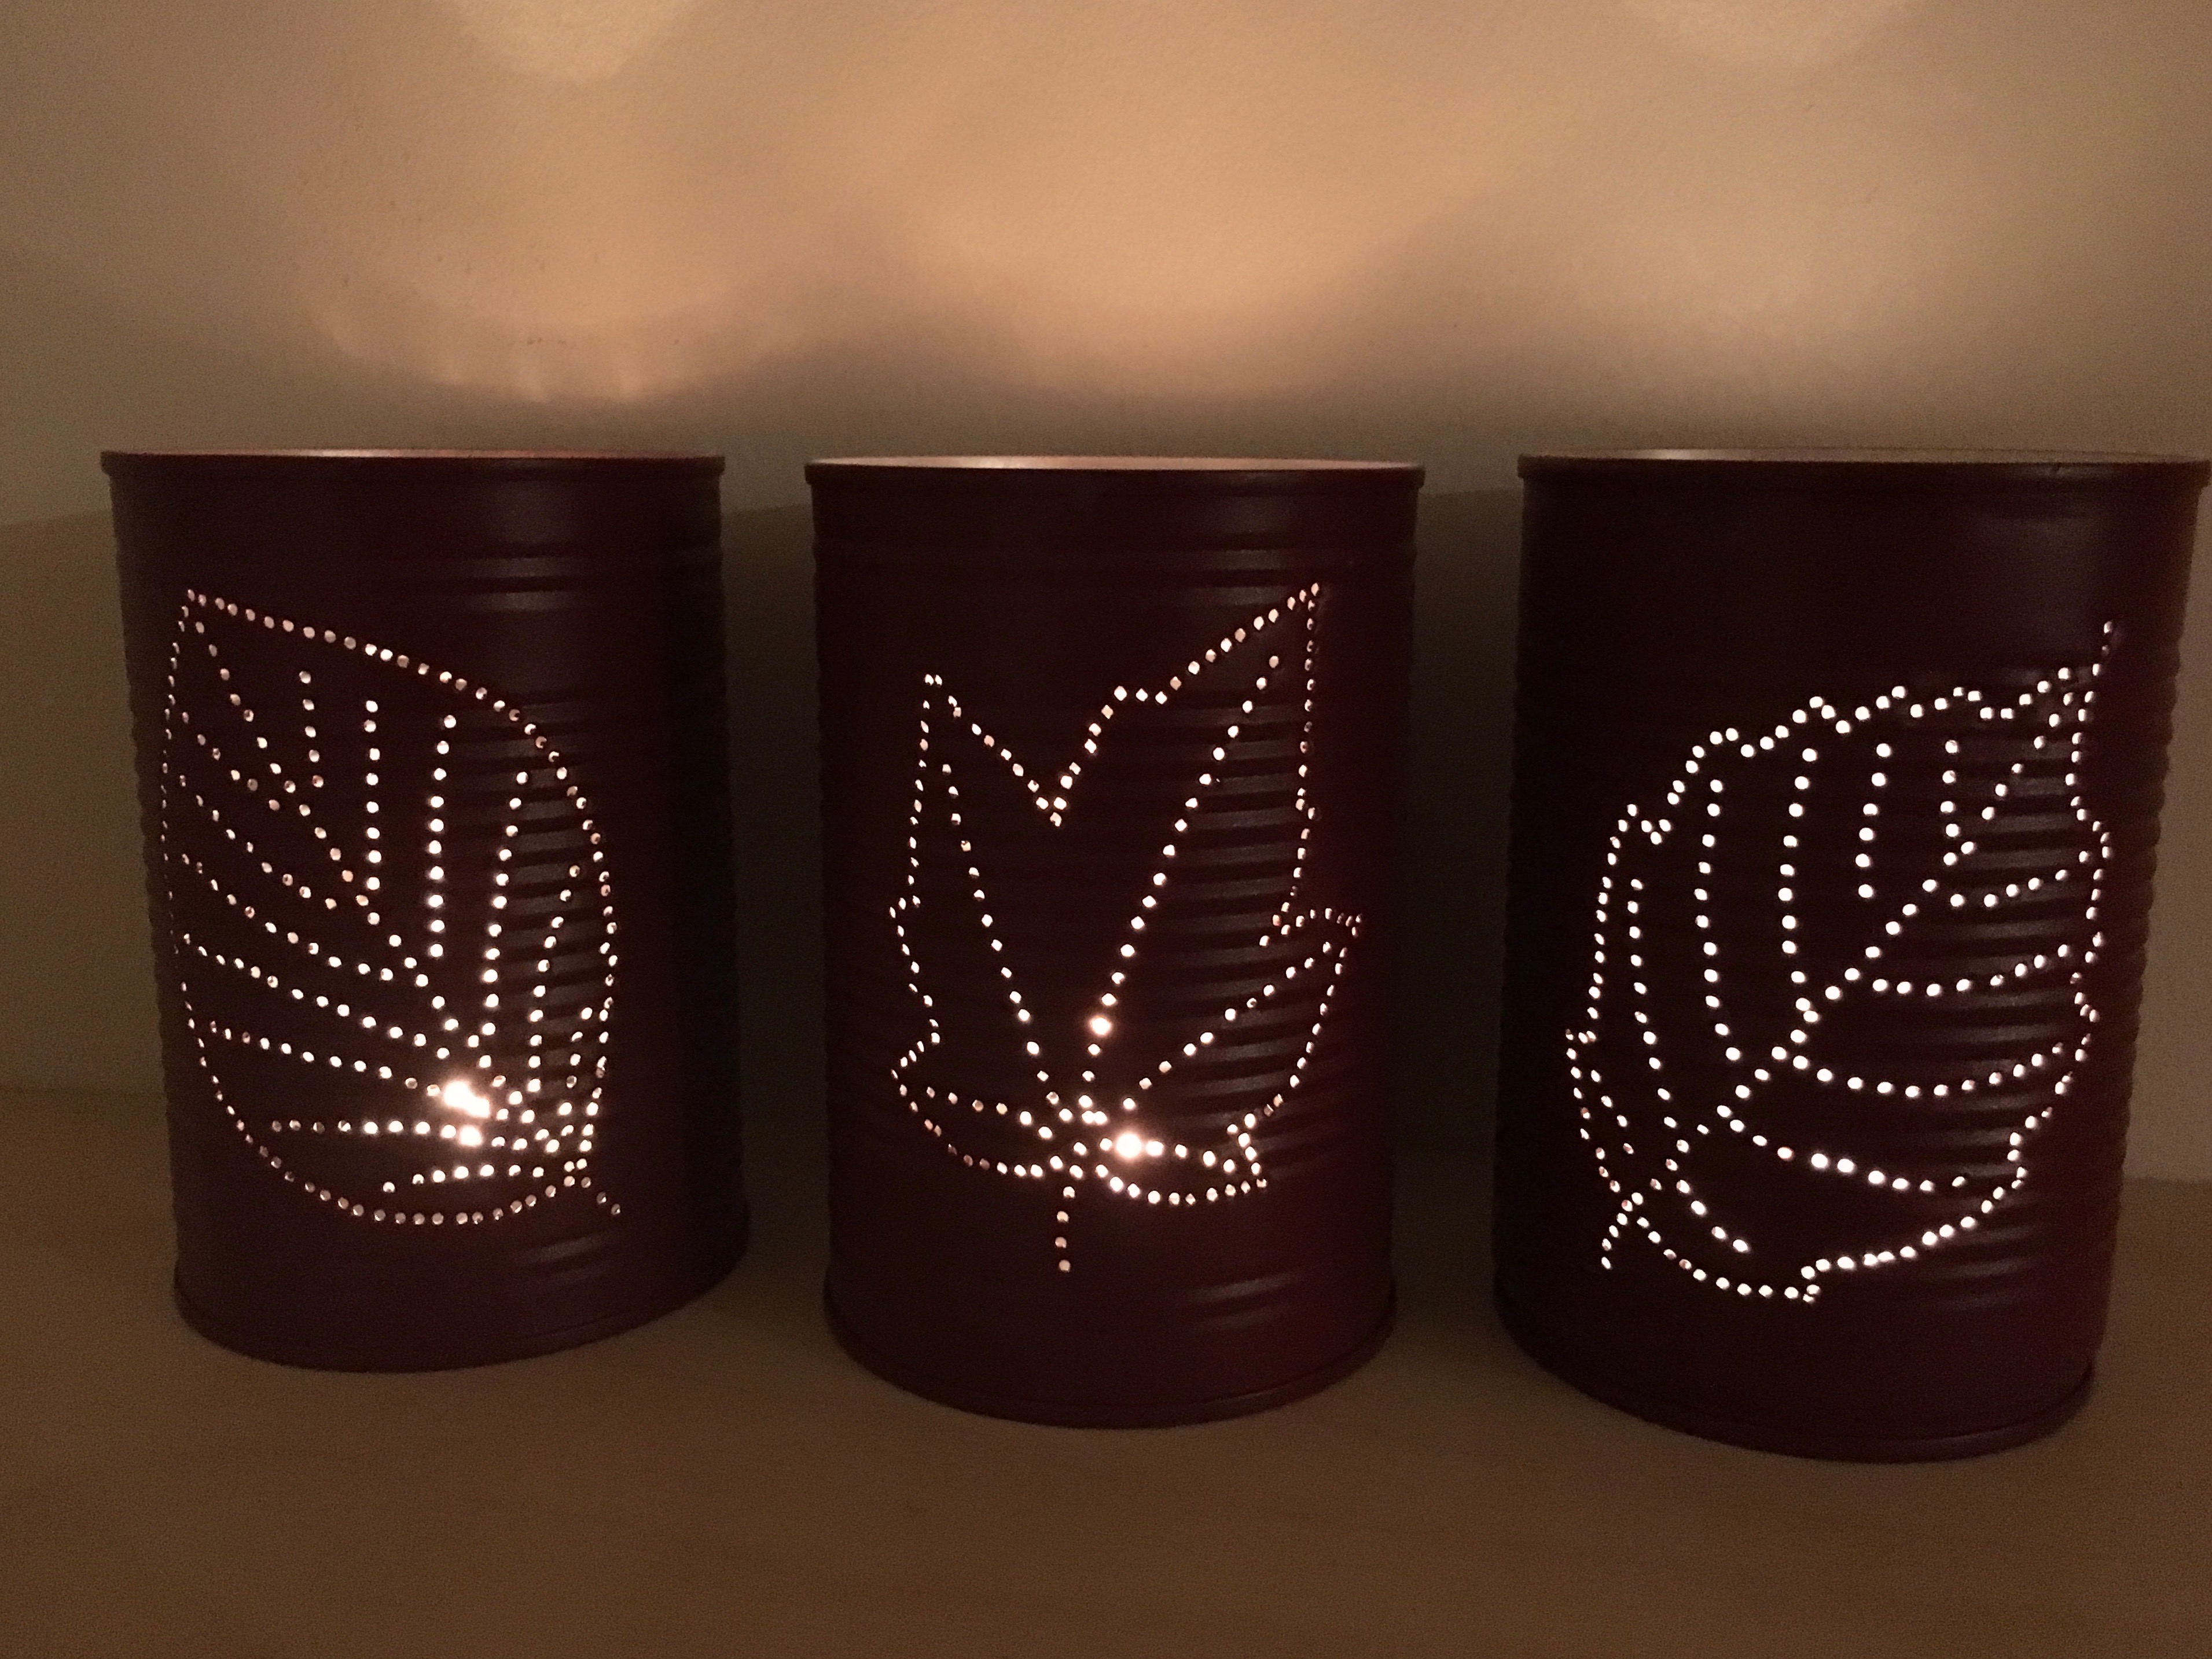 Three candle holders with leaf designs glow in a dark room